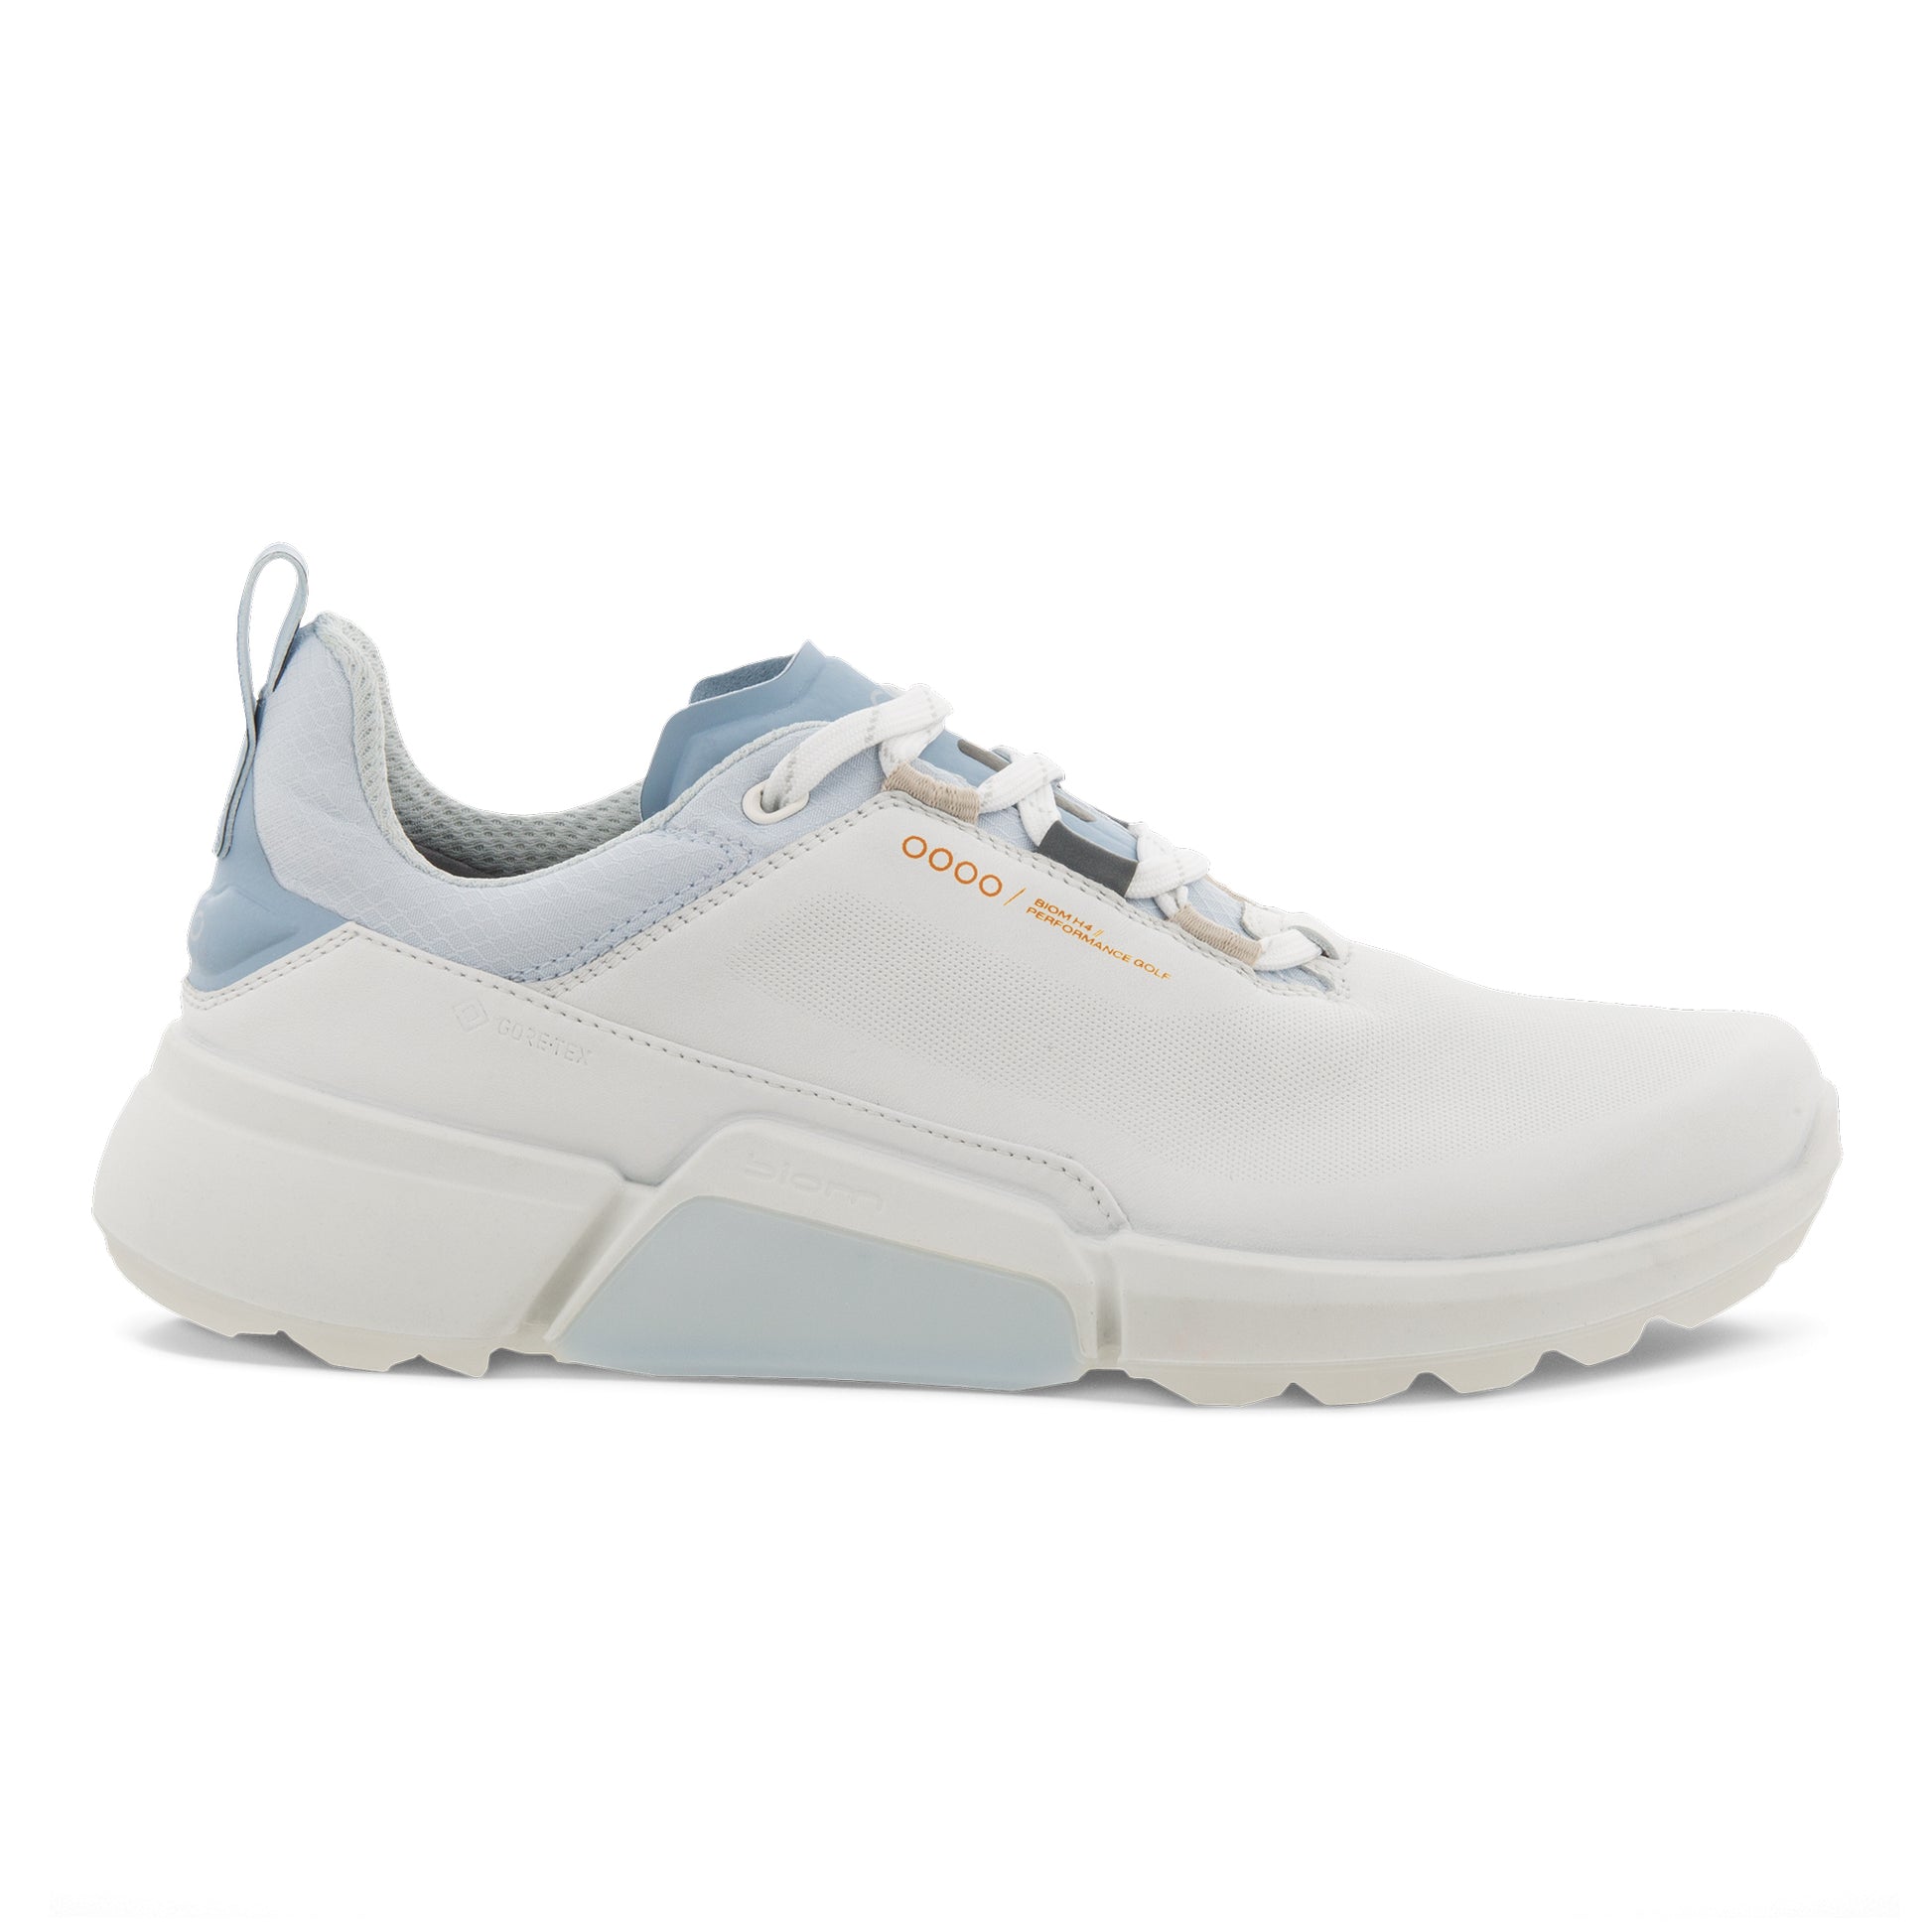 ECCO Ladies BIOM® H4 Golf Shoe with GORE-TEX in White